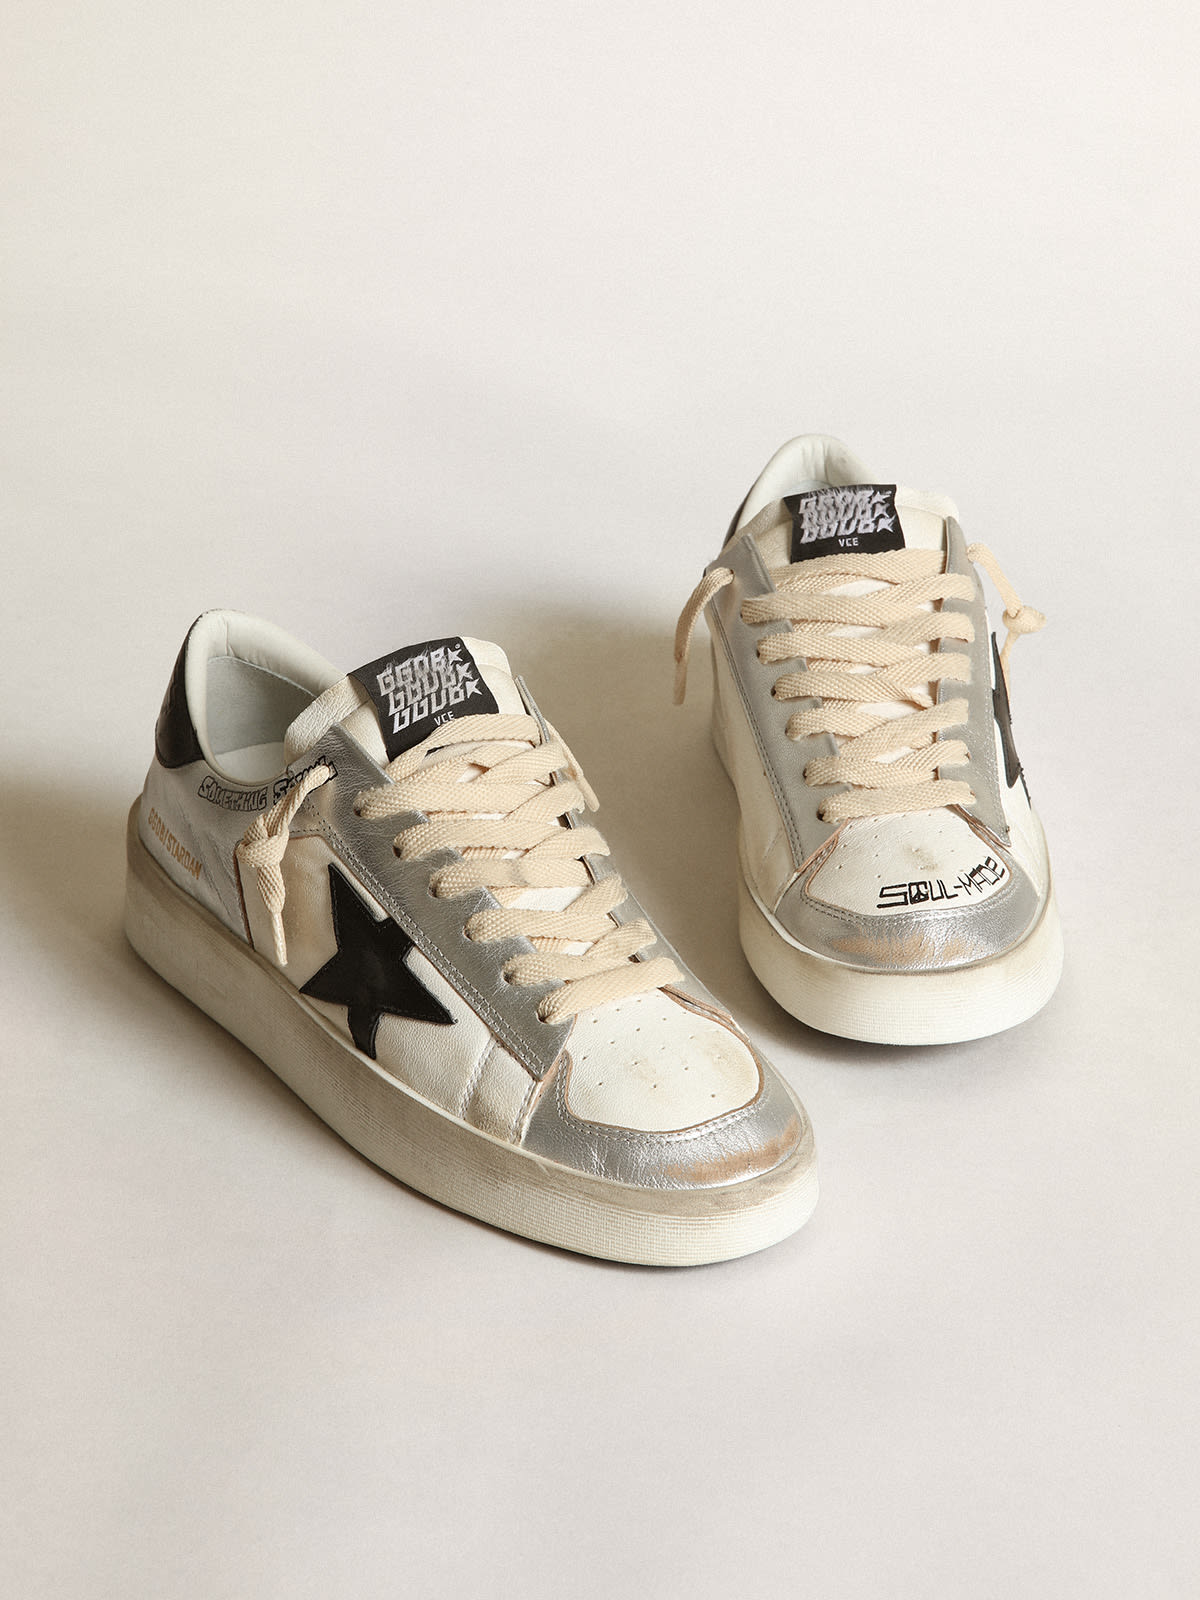 Golden Goose - Men’s Stardan sneakers in silver metallic leather with white nappa leather inserts and black leather star in 